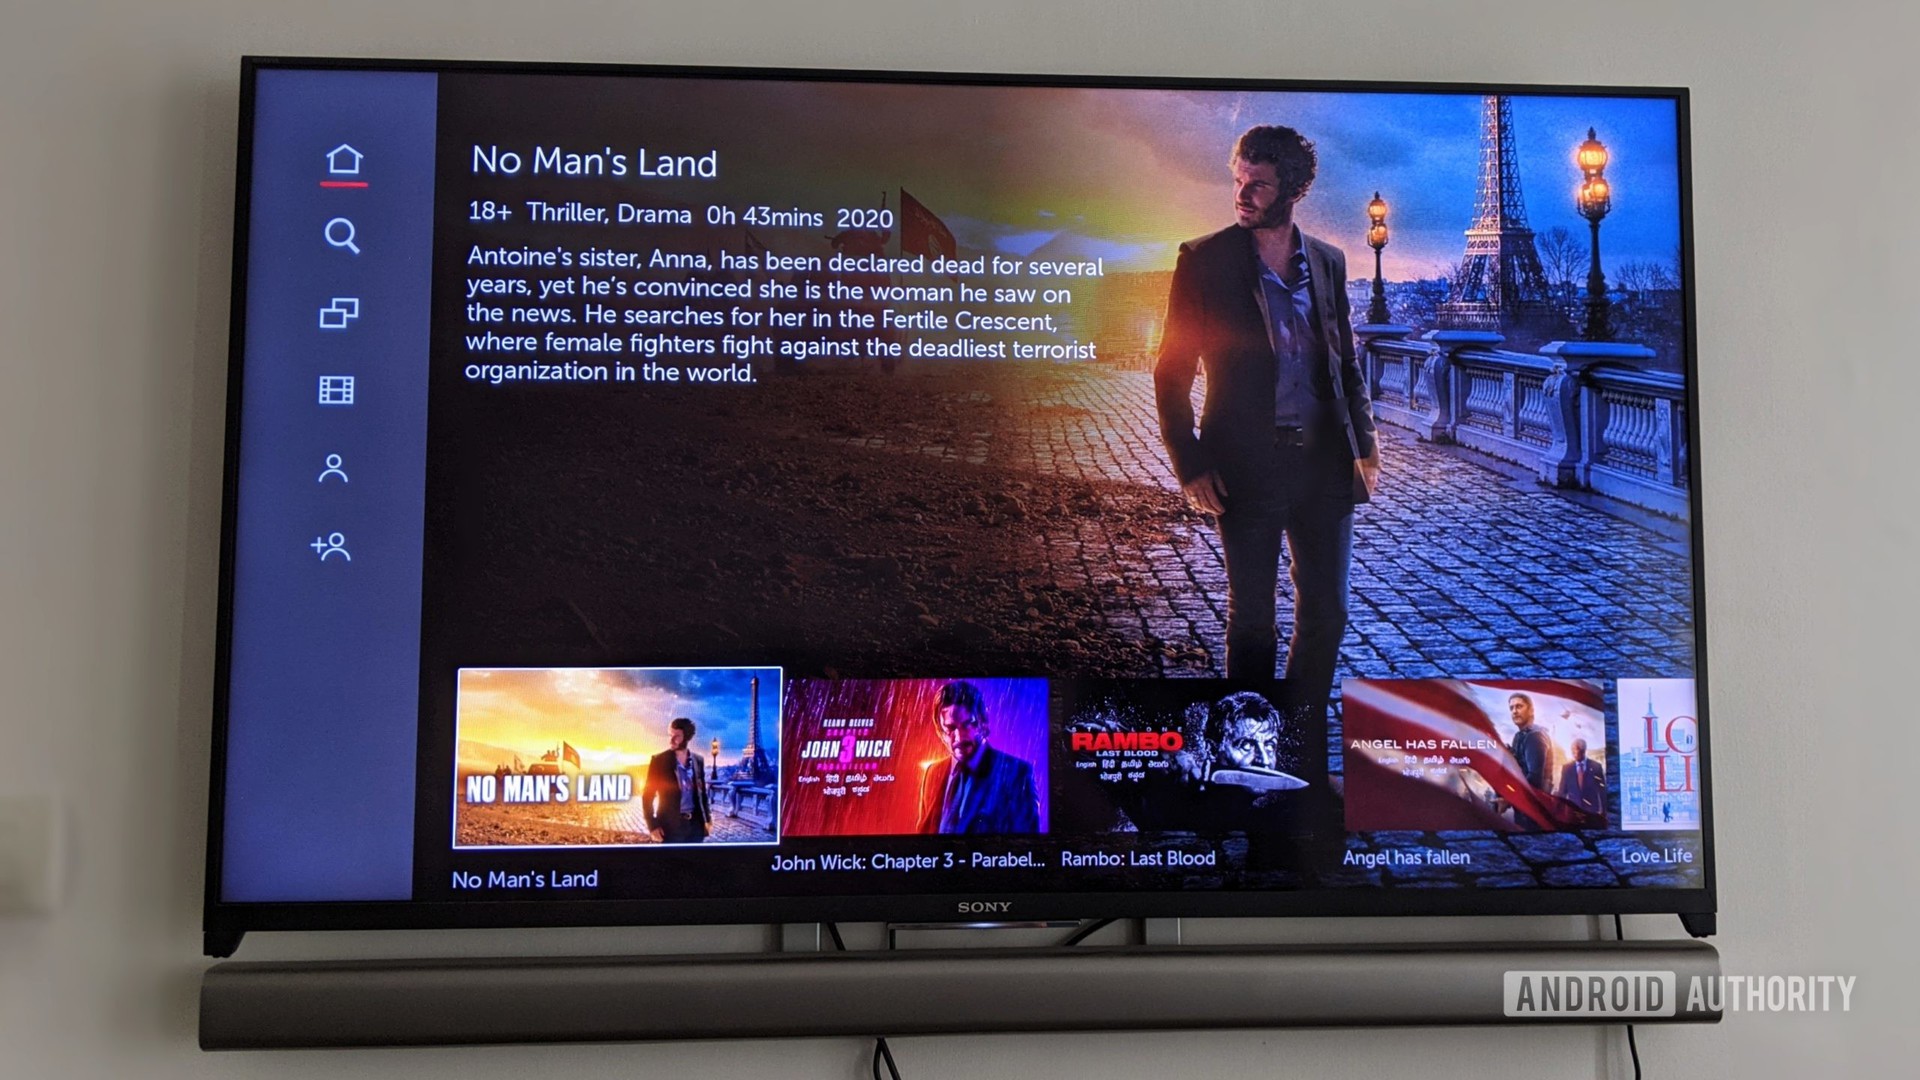 Lionsgate Play app on Sony Android TV